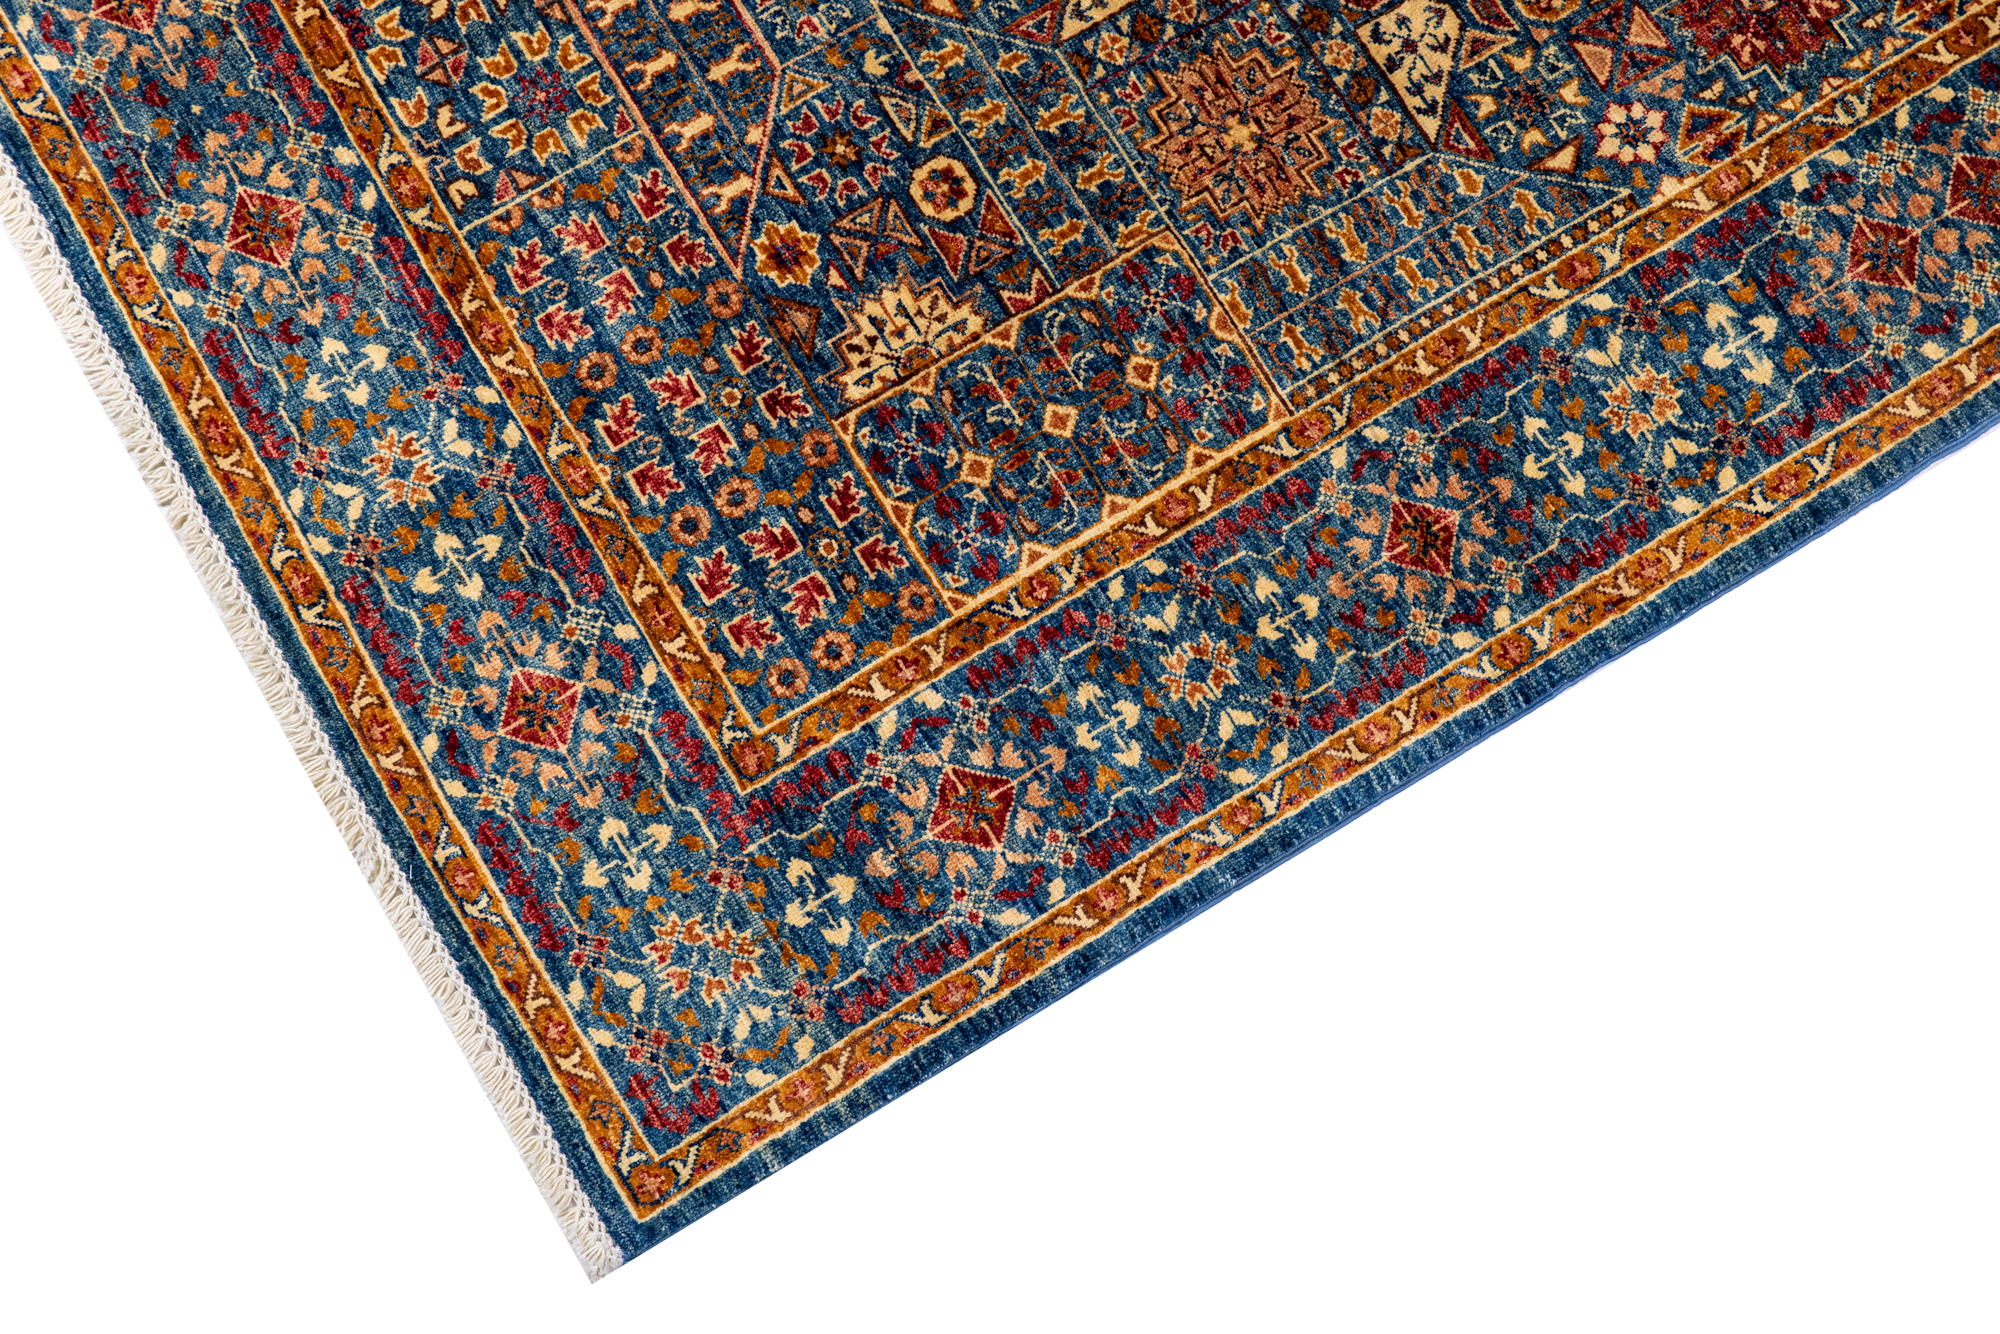 Size: 171x236cmFoundation: CottonPile: Handspun WoolShape: Rectangular Hand knotted and meticulously crafted by Afghan artisans in Afghanistan, this stunning Mamluk rug is made out